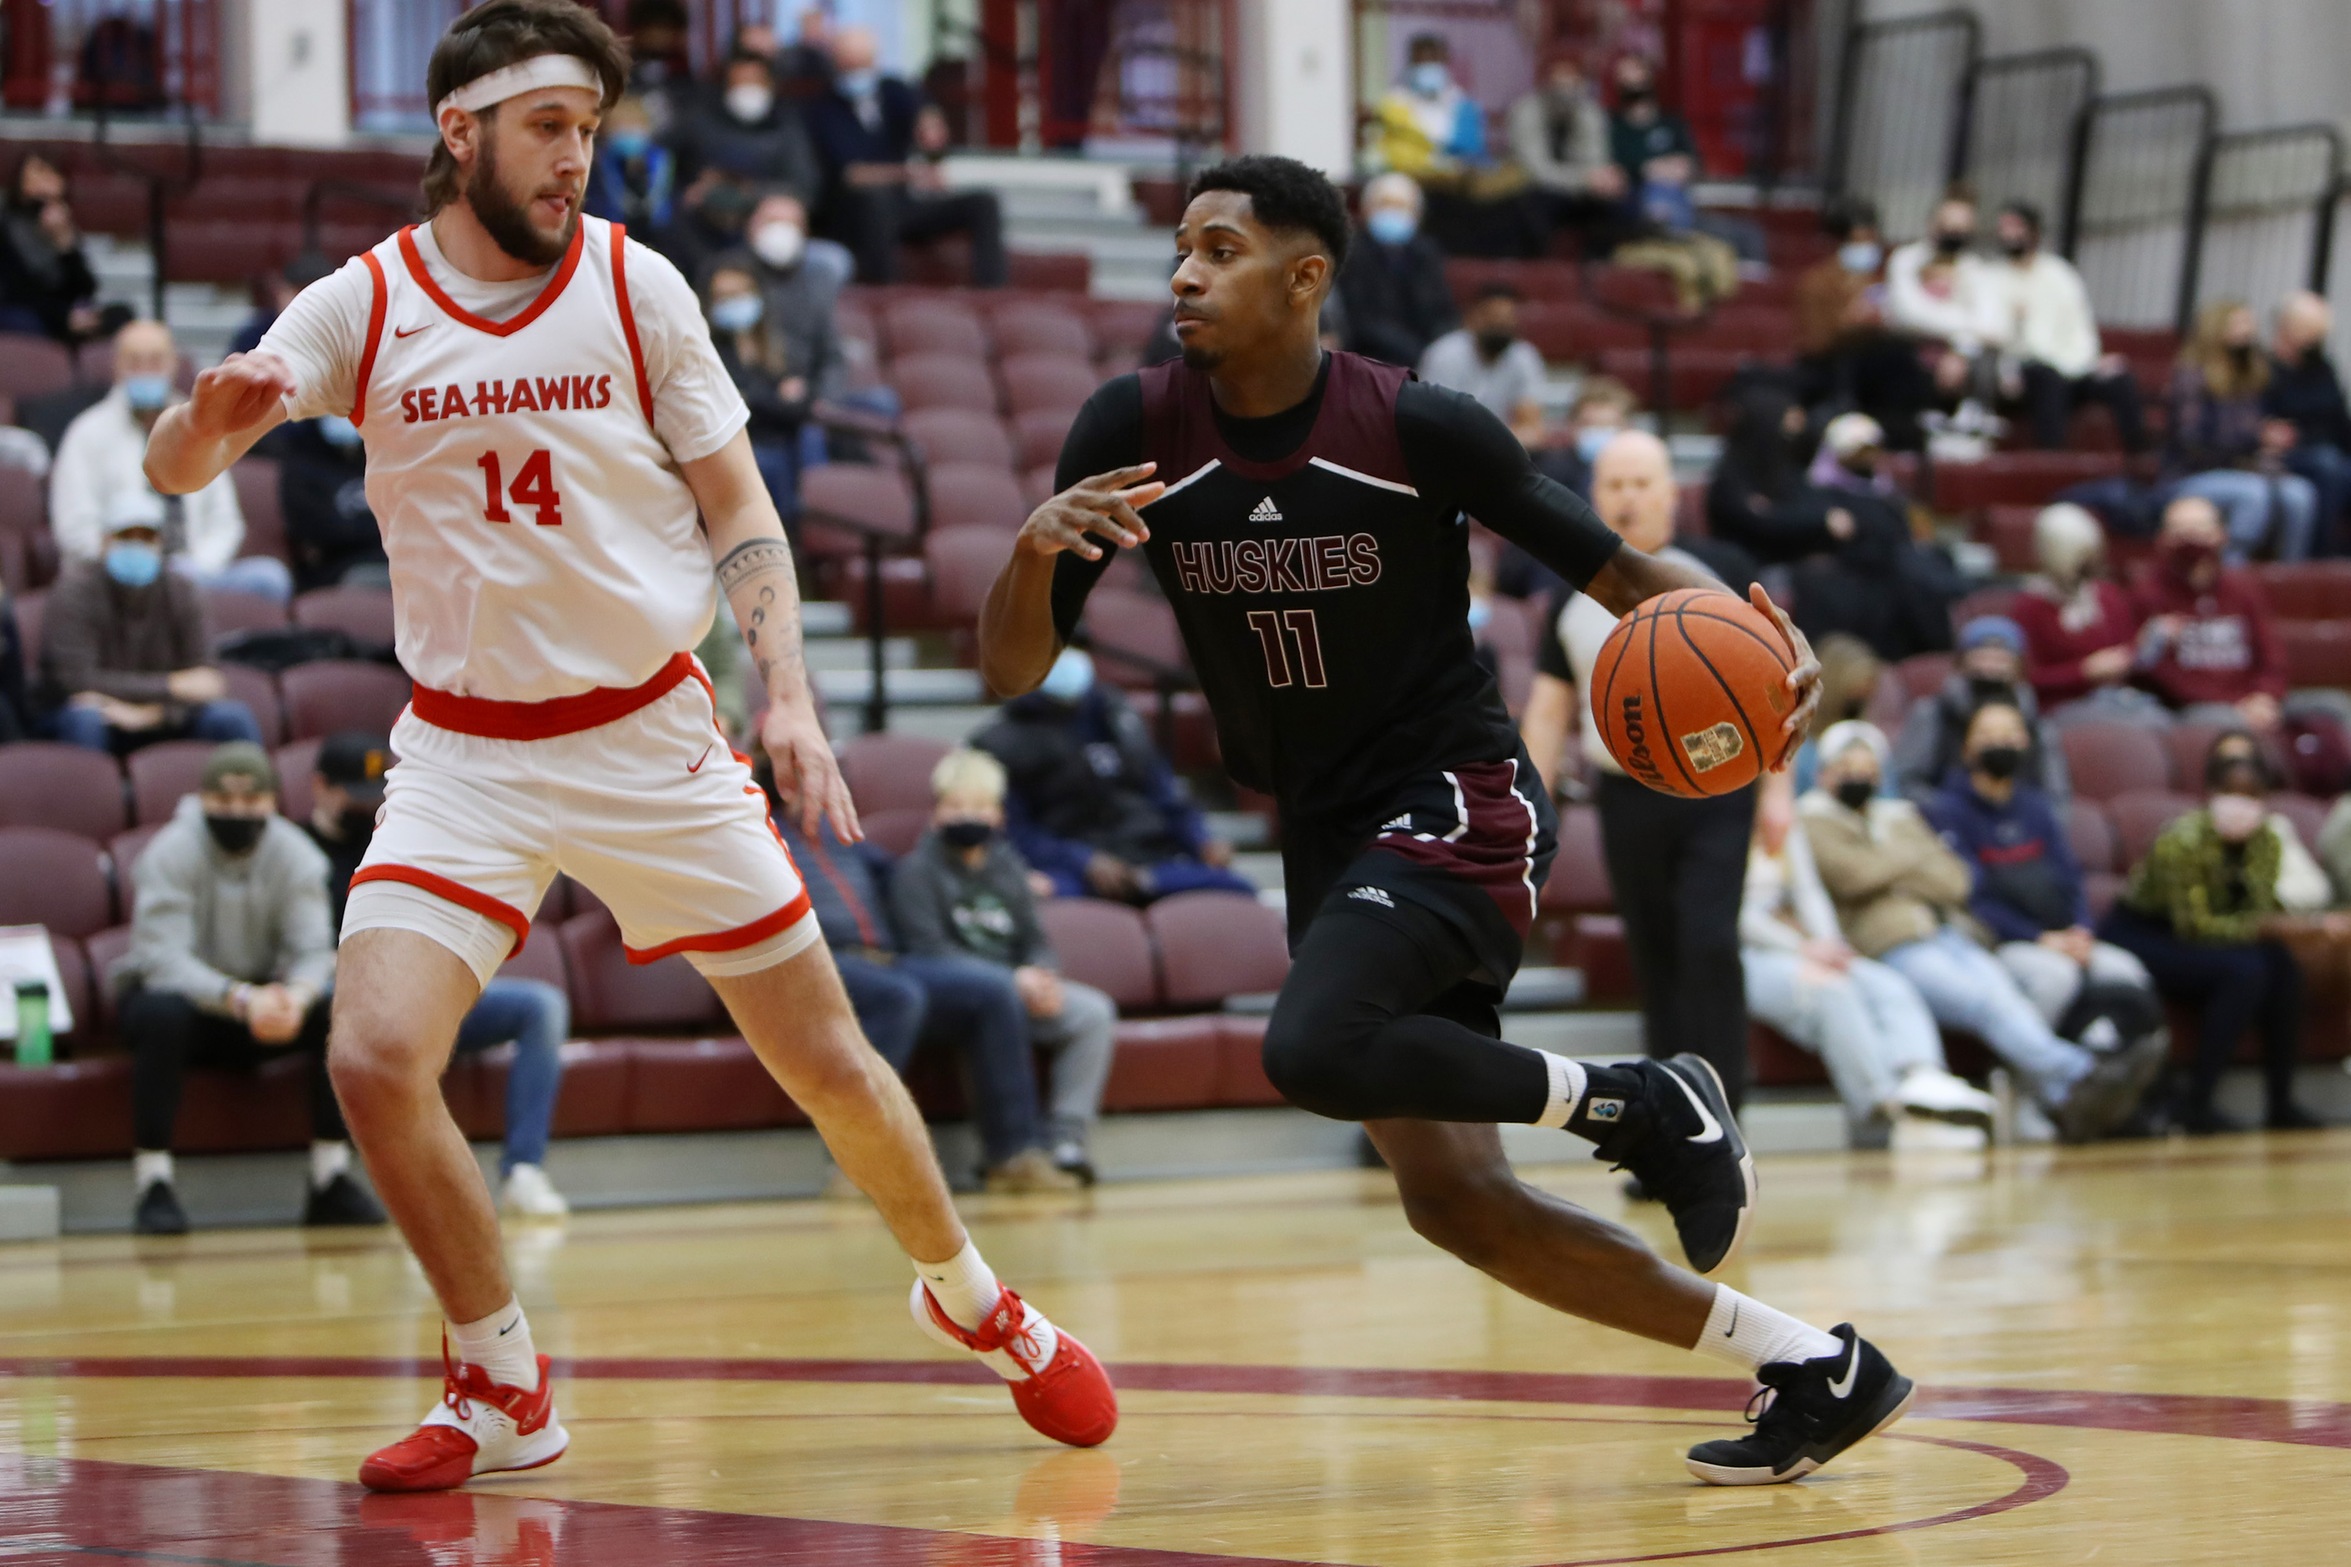 Huskies guard Dontae Mitchell drives against the Memorial Sea-Hawks. Mitchell was named Subway Player of the Game with 23 points in the Huskies 98-76 win on March 6, 2022.